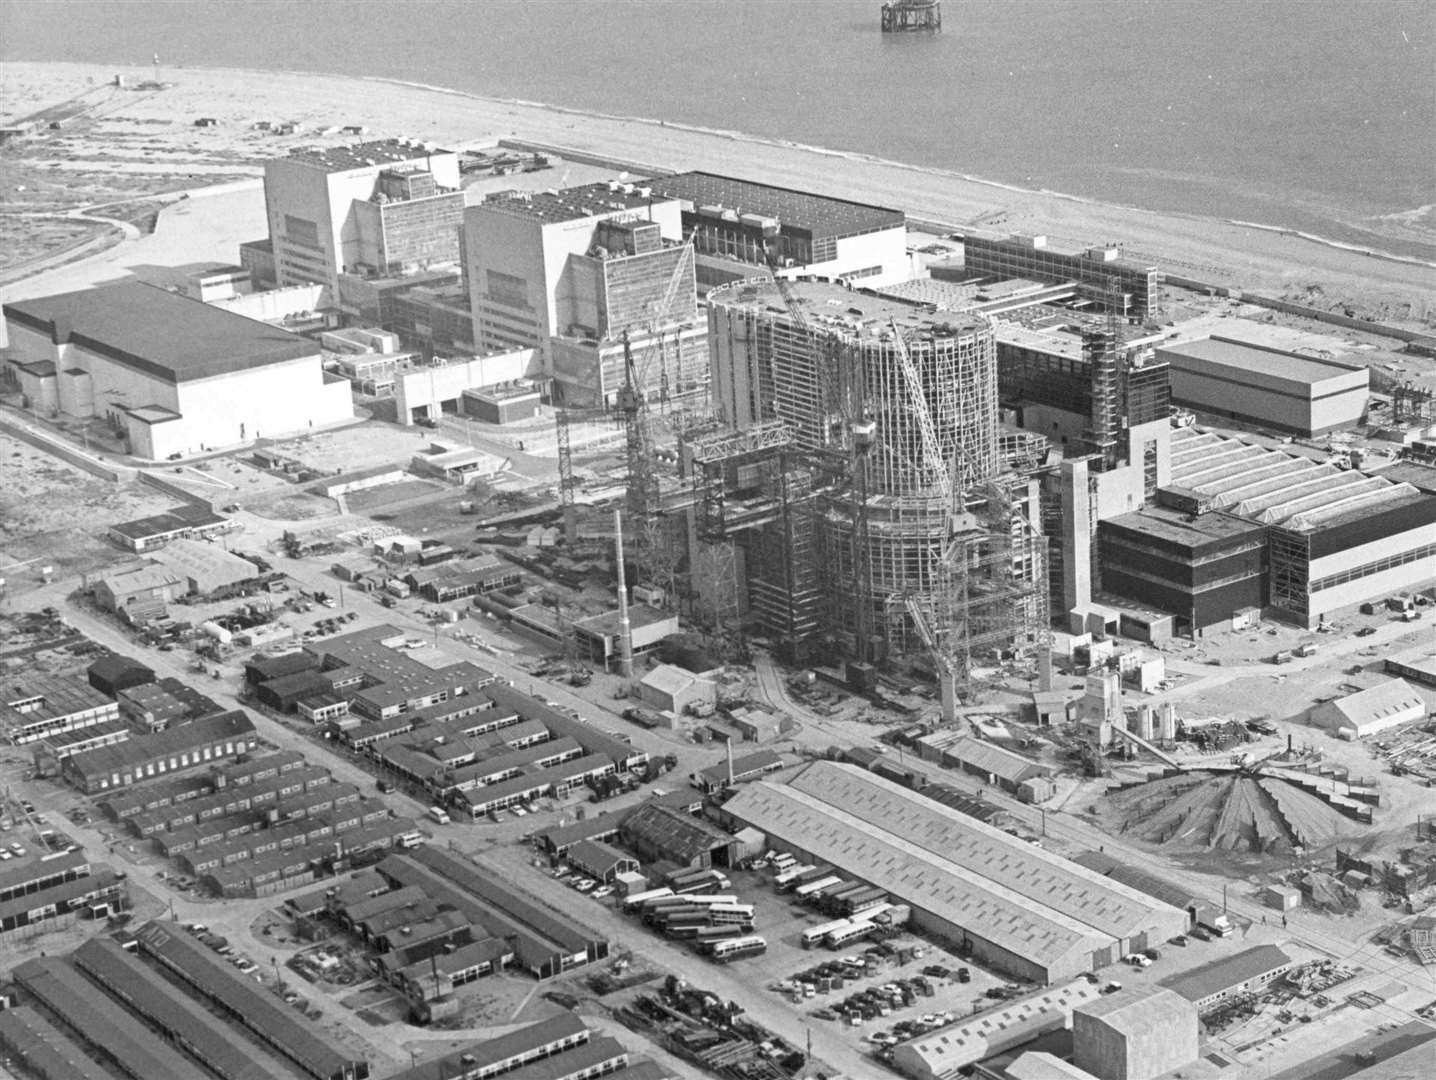 The power station pictured in 1969